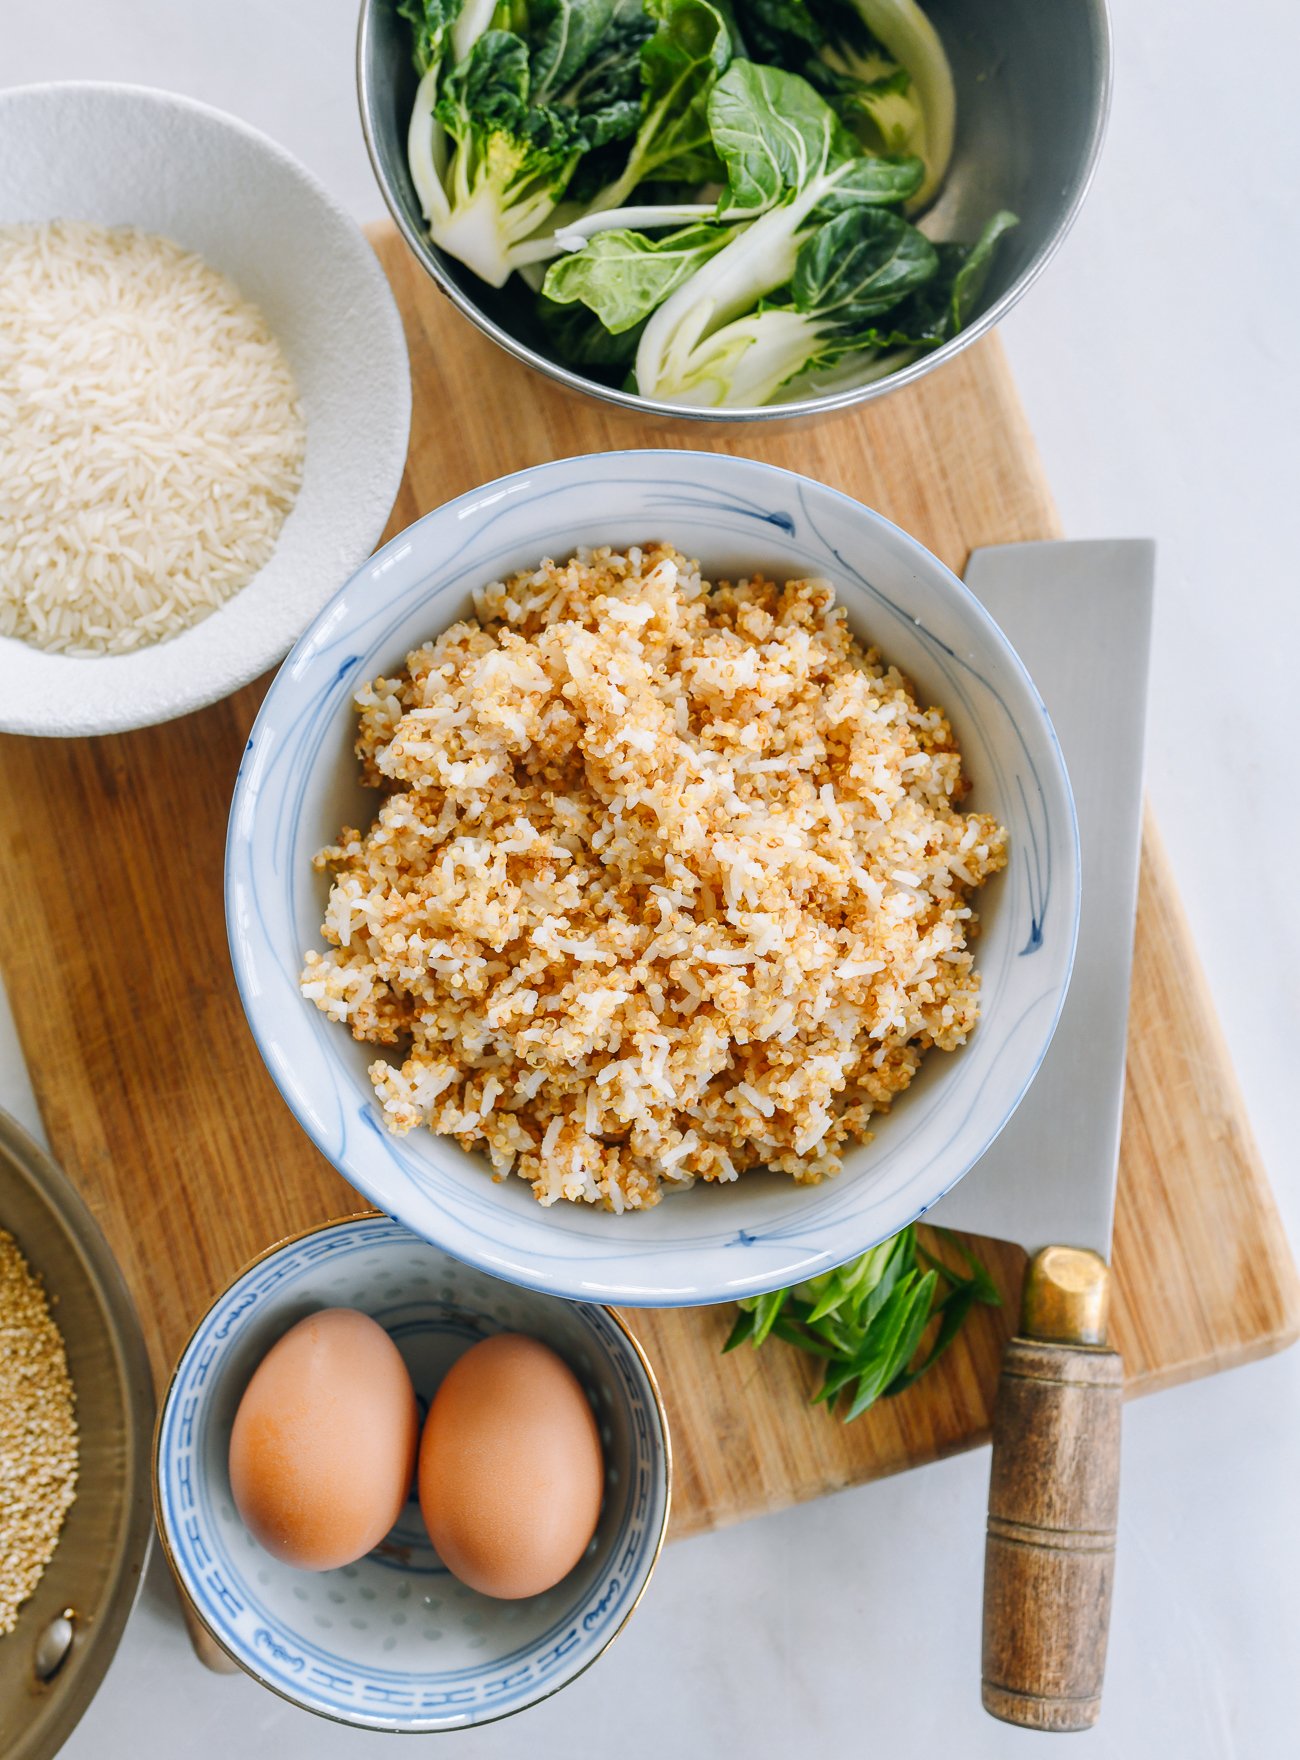 cooked quinoa rice mix on a cutting board with eggs, vegetables and bowls of uncooked rice and quinoa